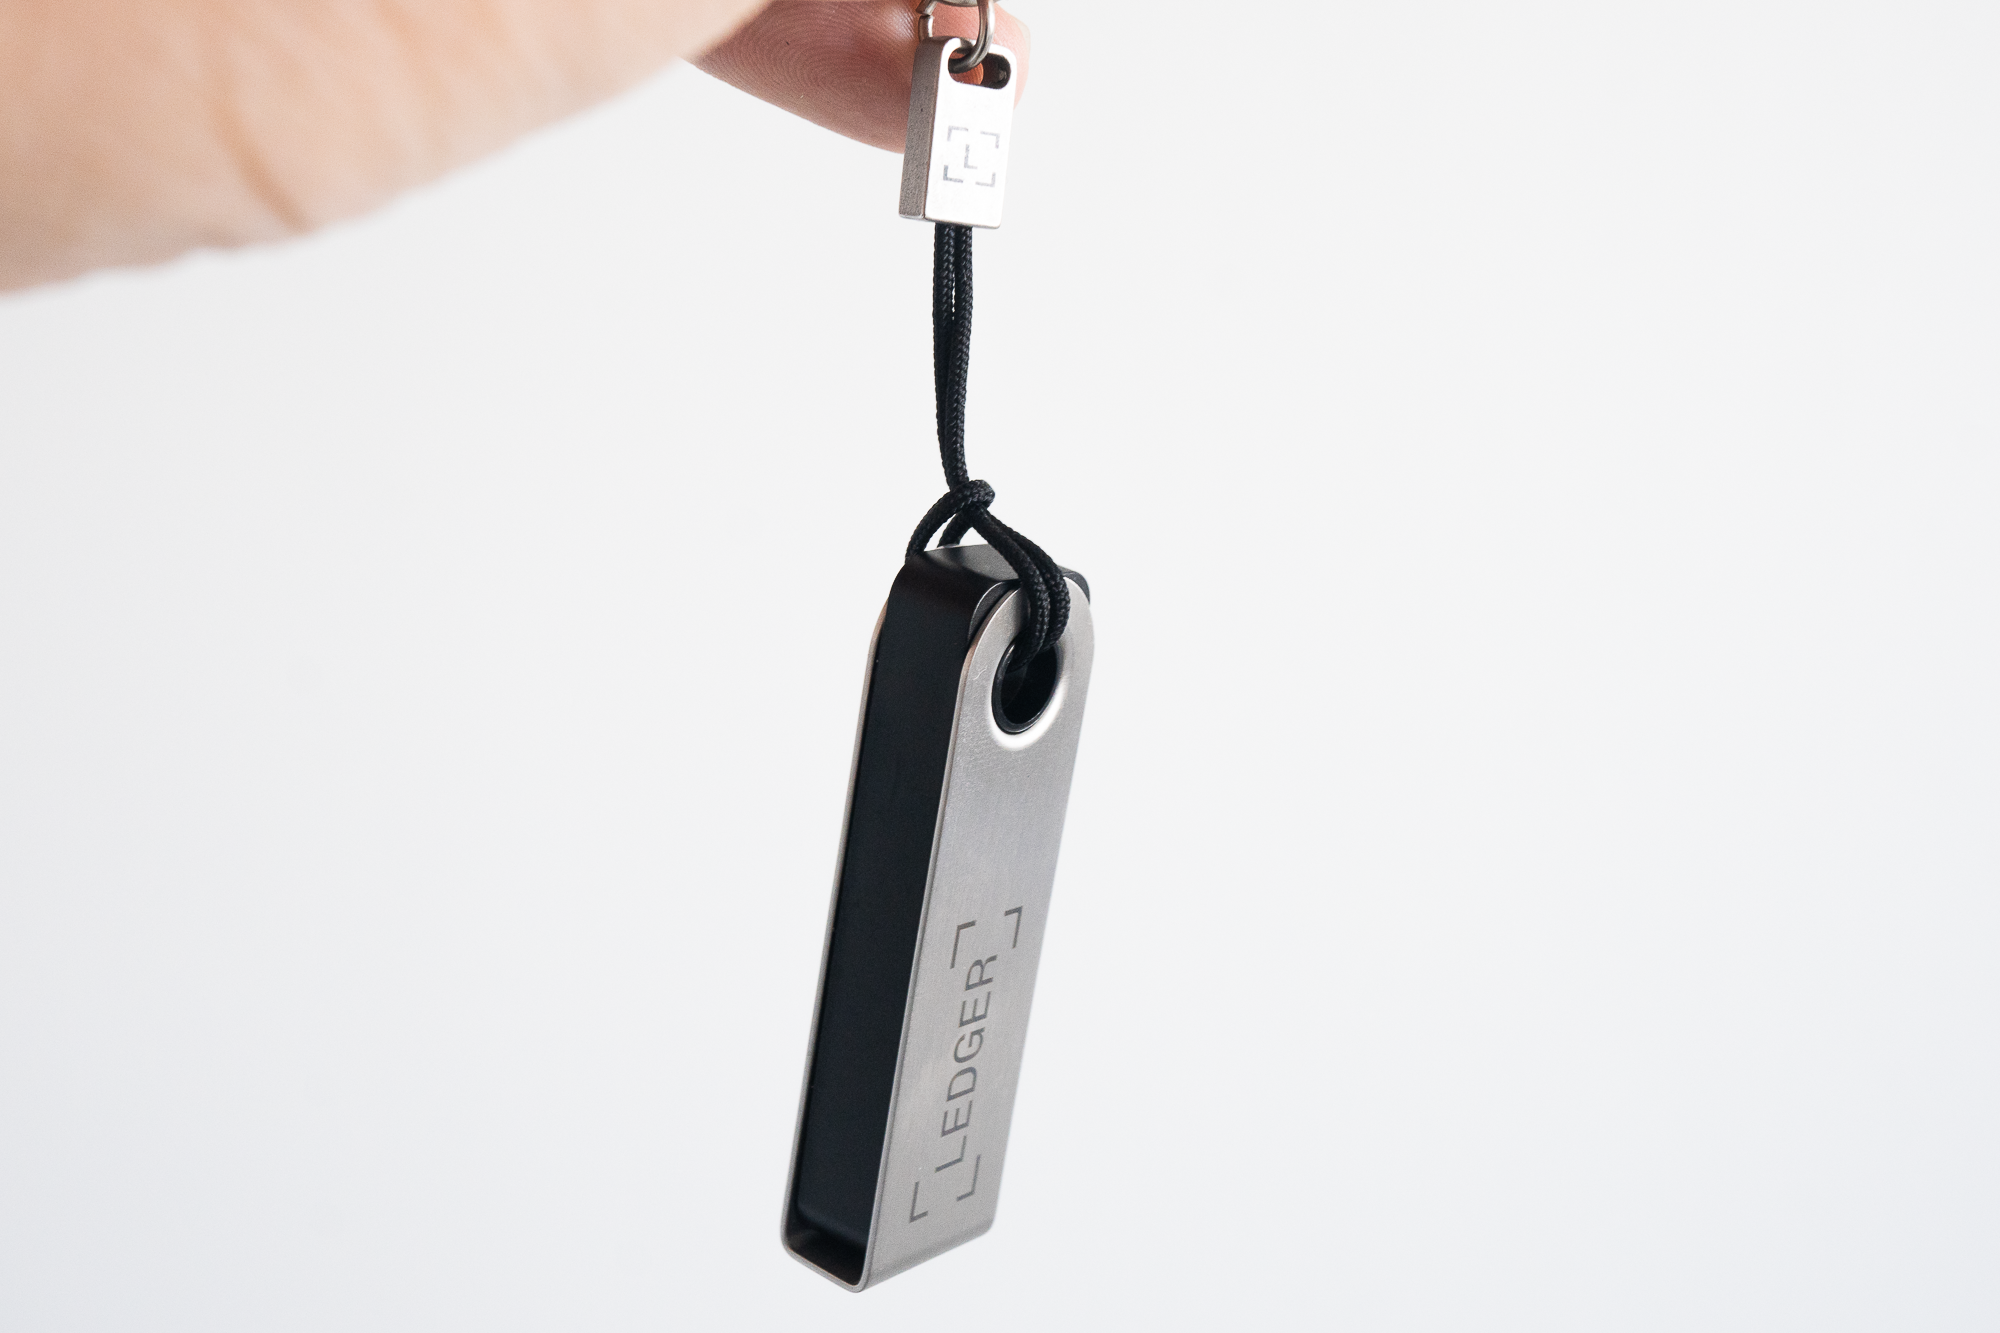 How to Attach the Lanyard to the Ledger Nano S Plus - Alex Kwa